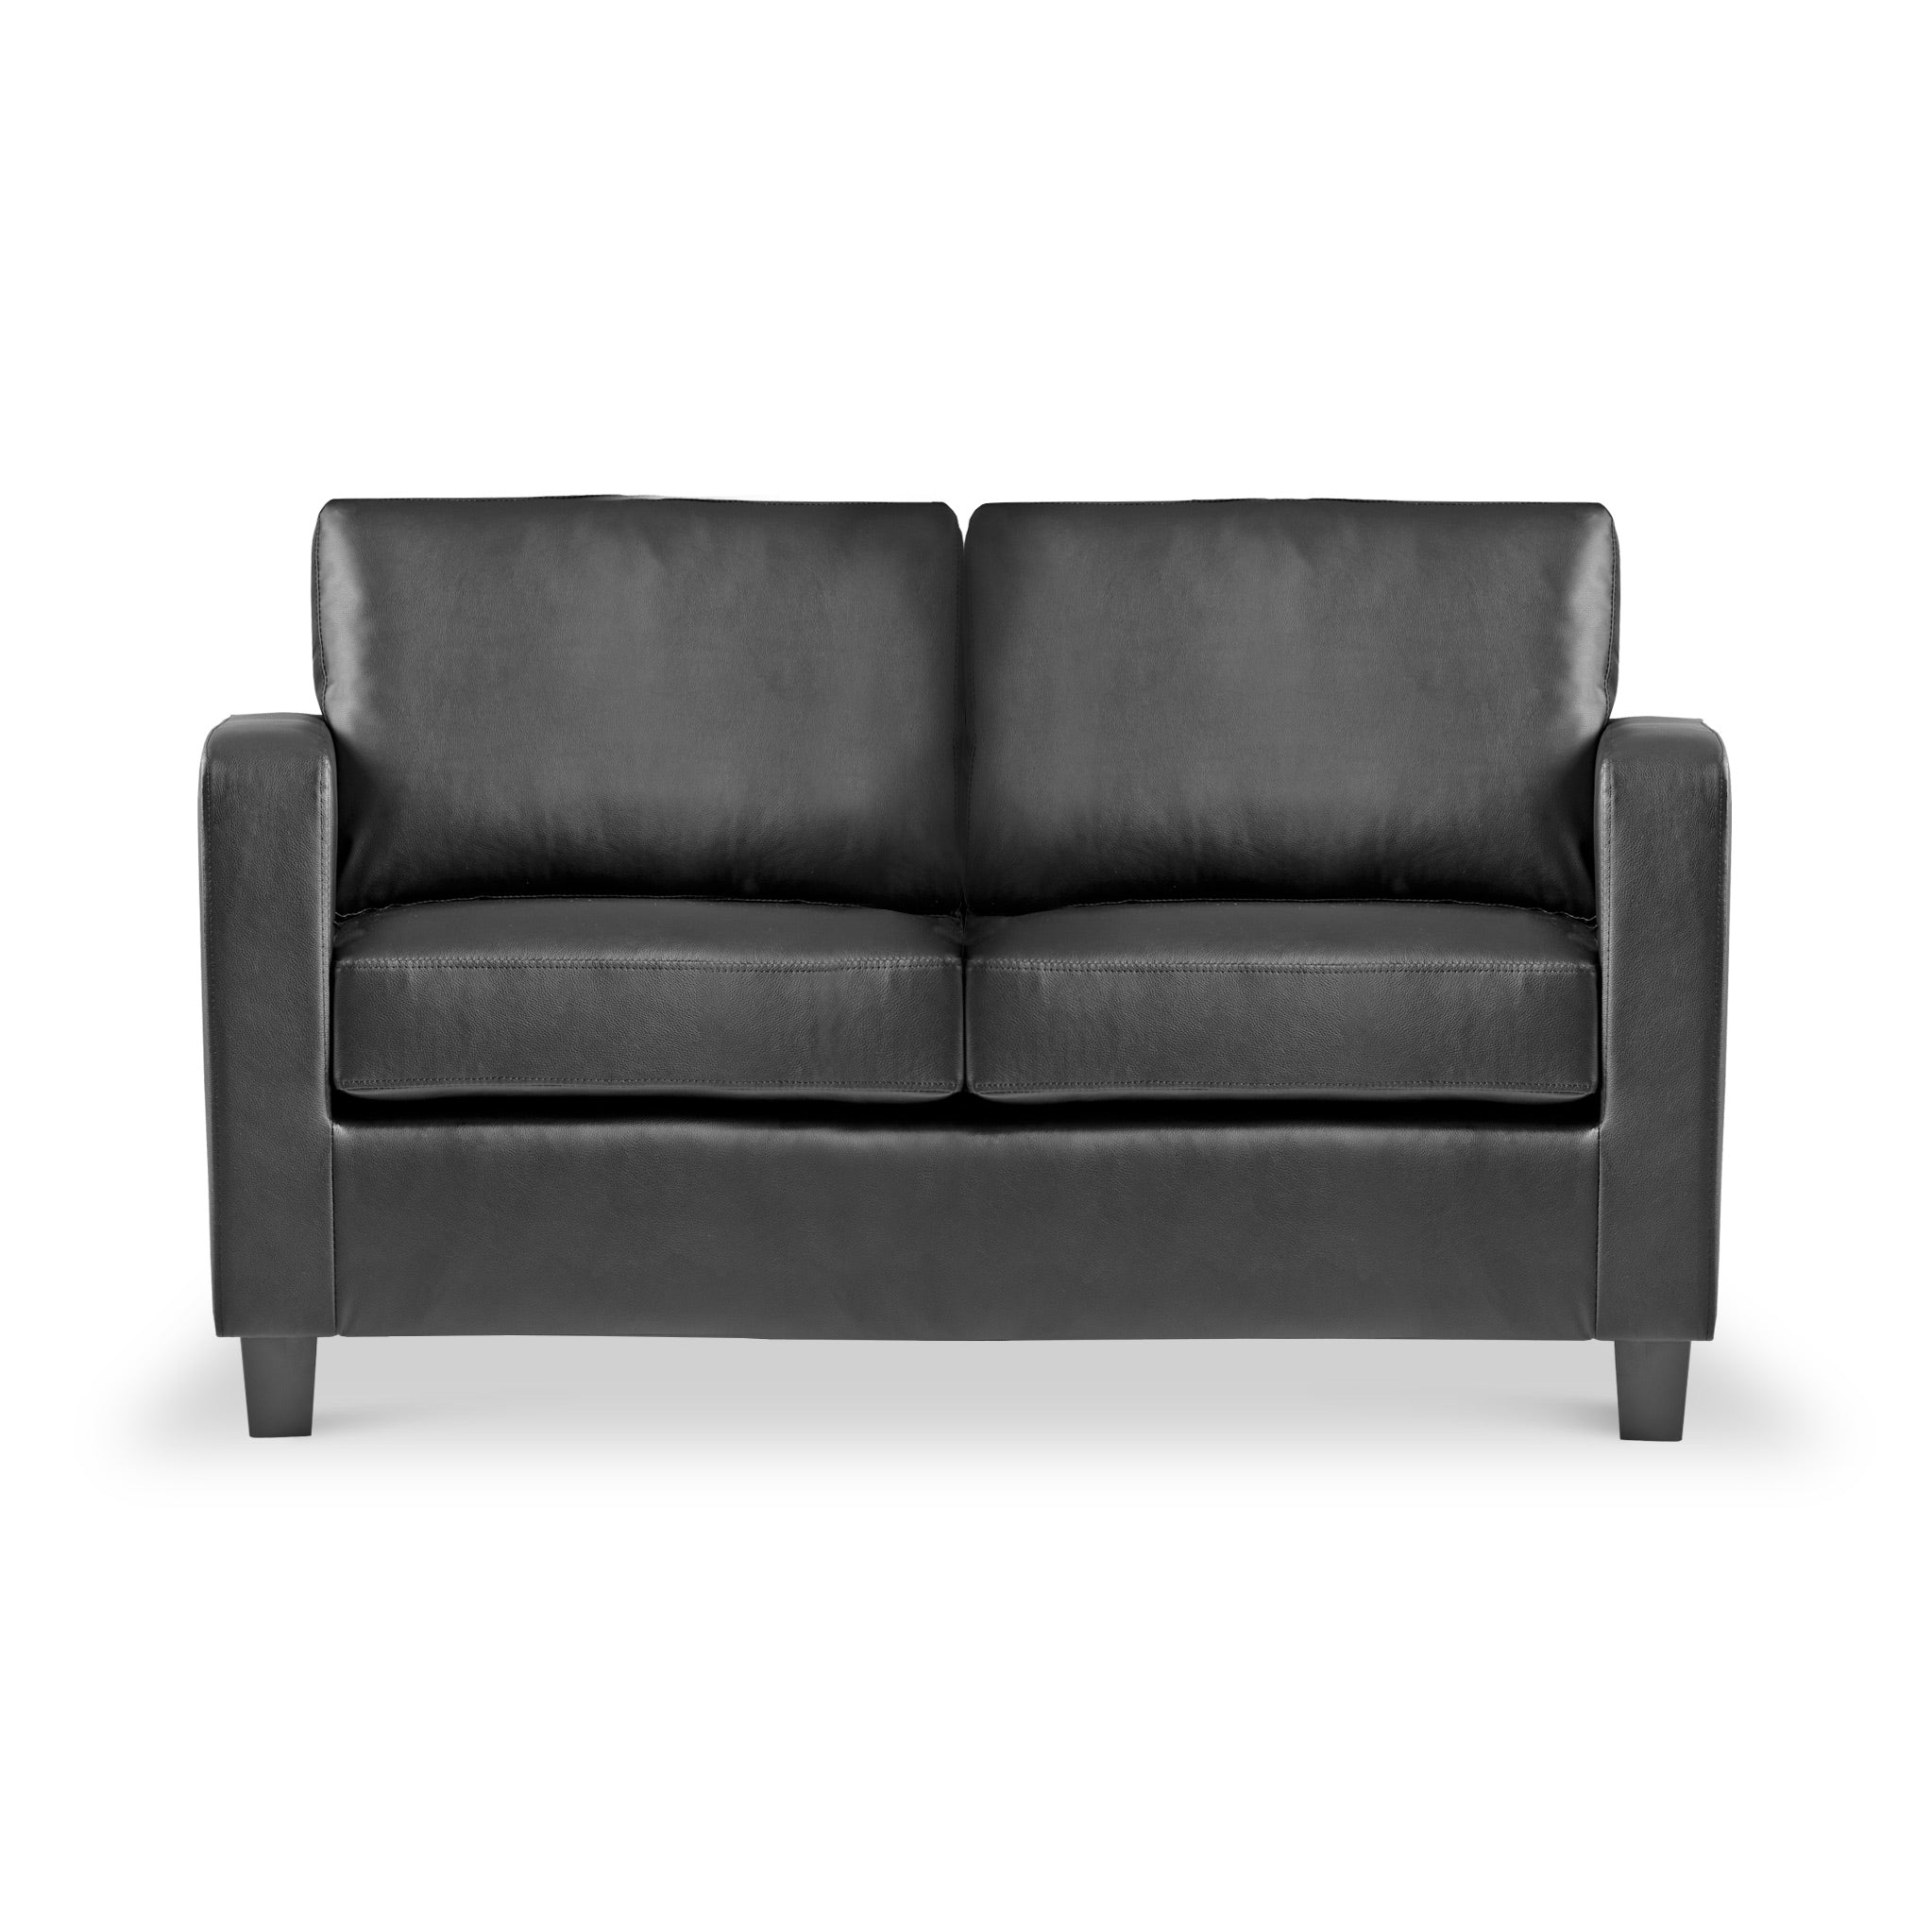 Cullen Black Faux Leather 2 Seater Sofa For Living Room Roseland